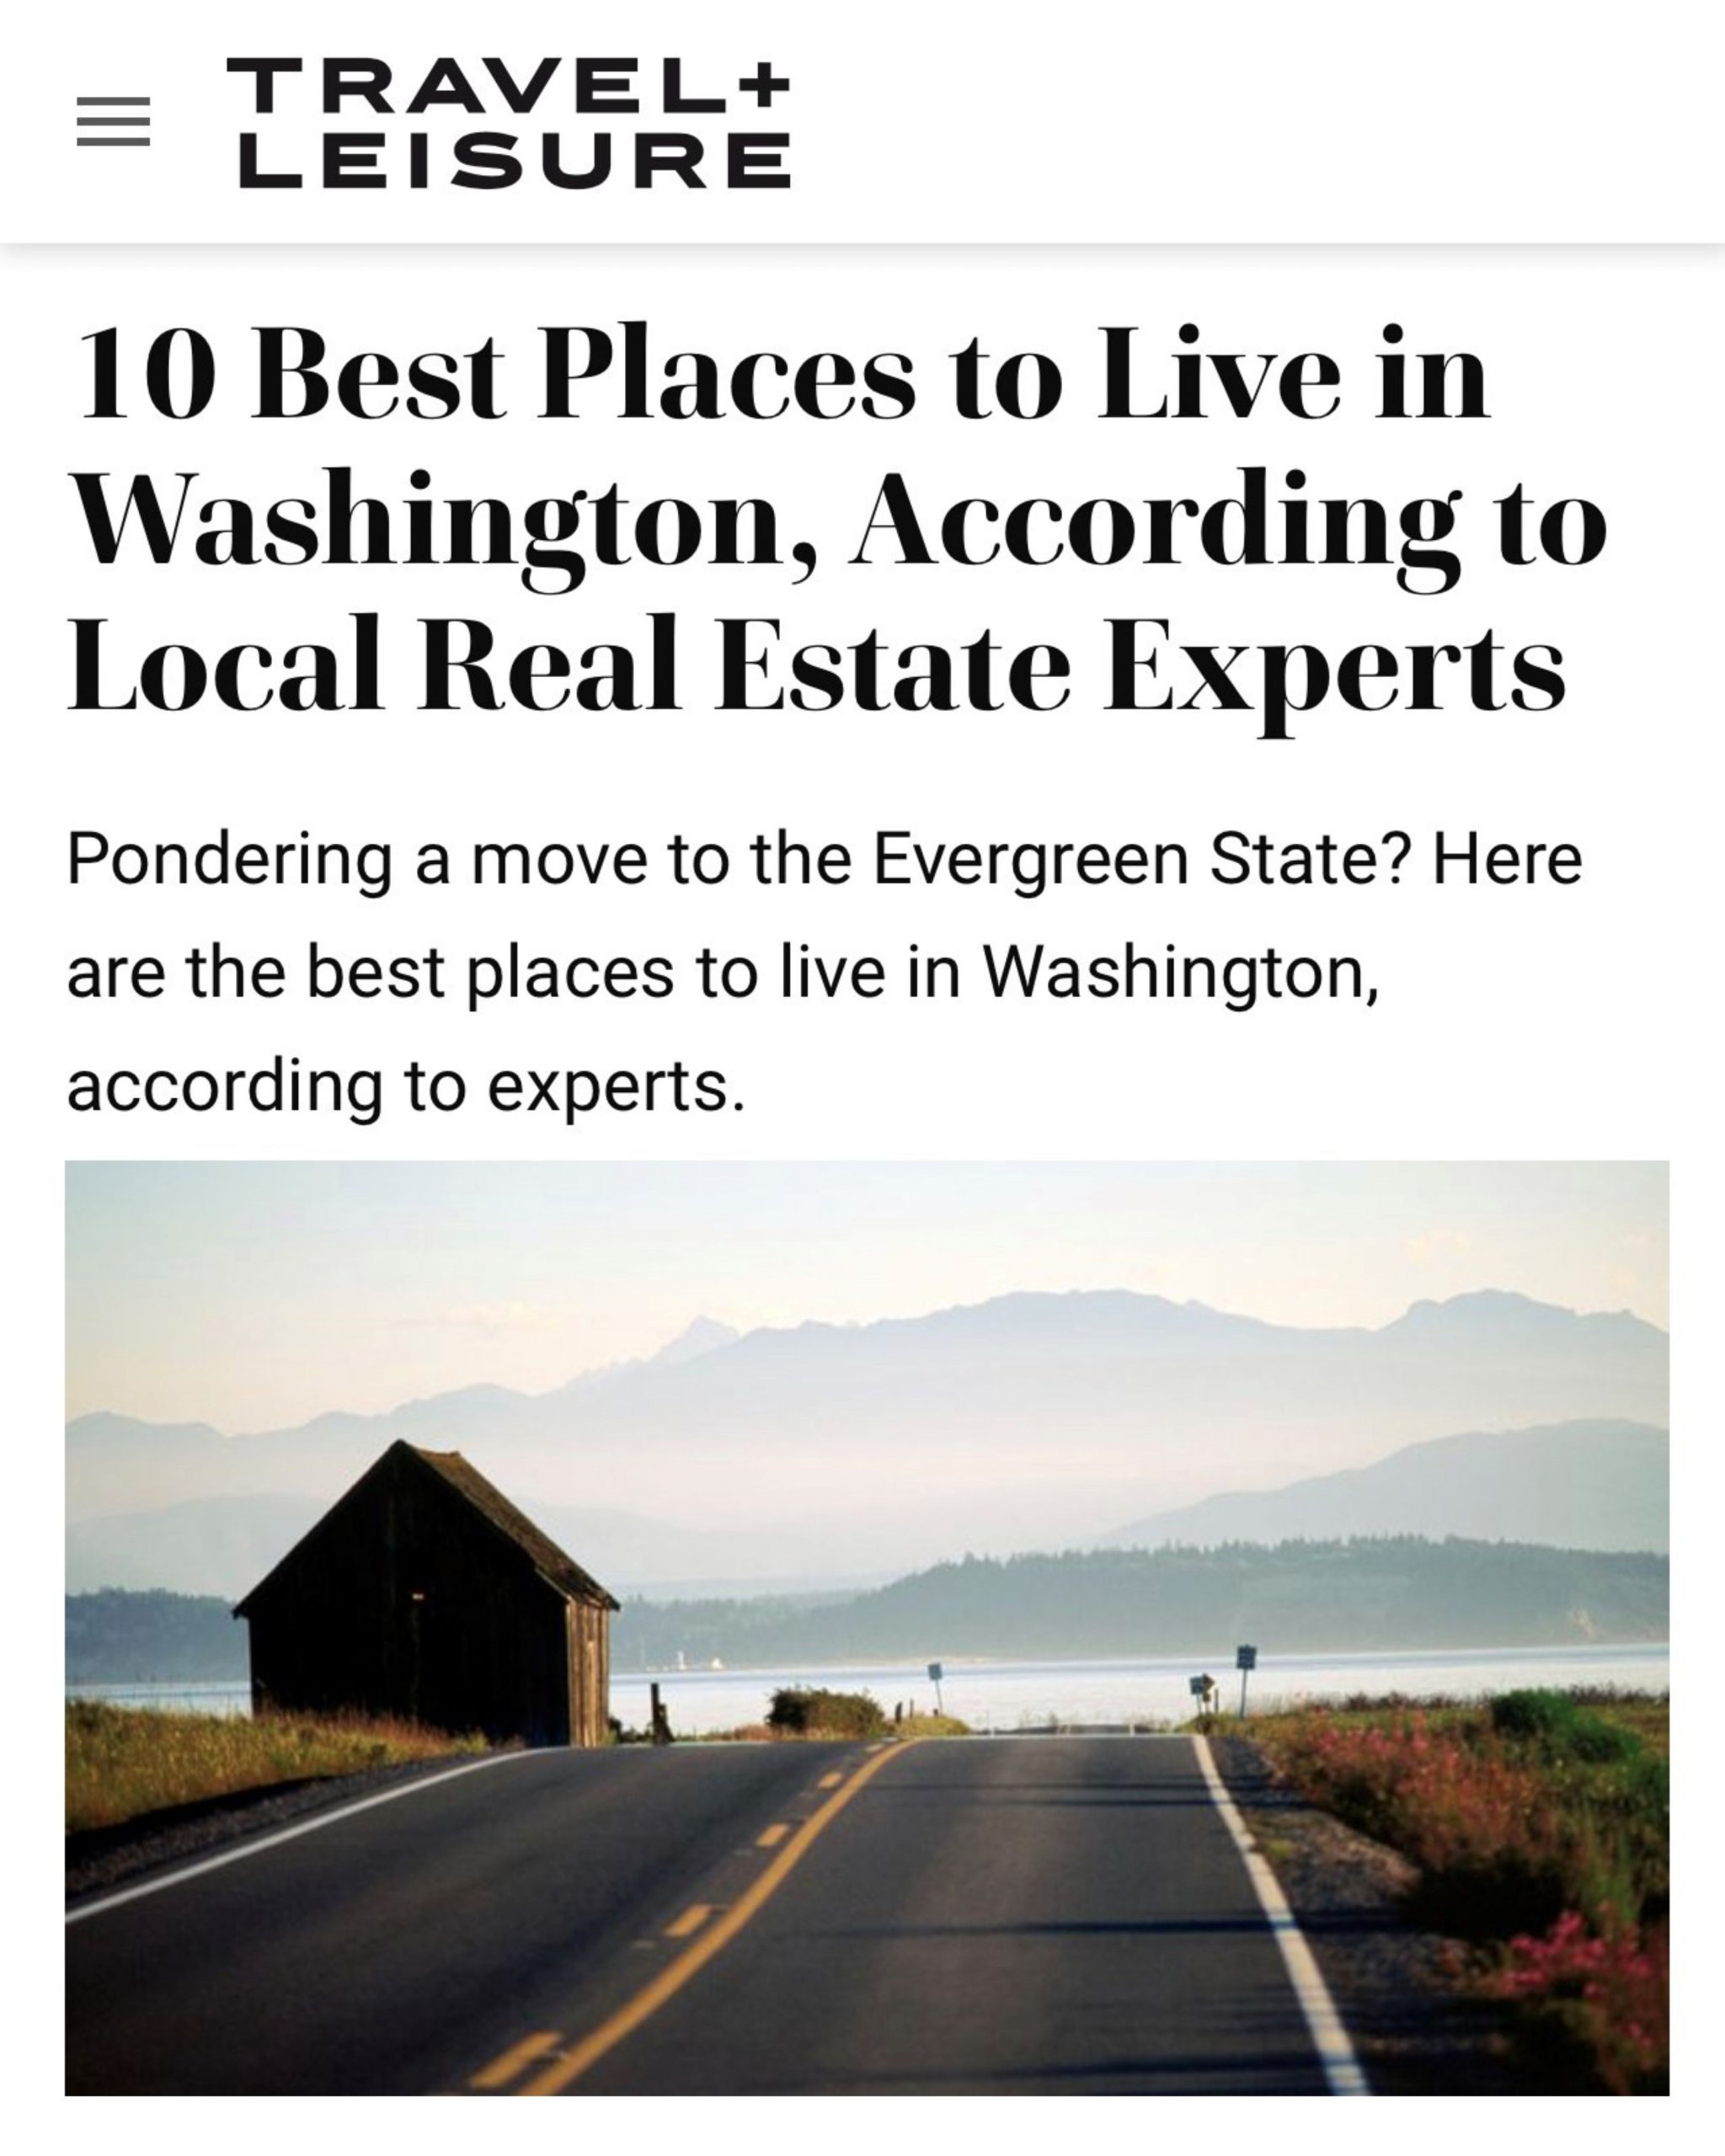 10 Best Places to Live in Washington